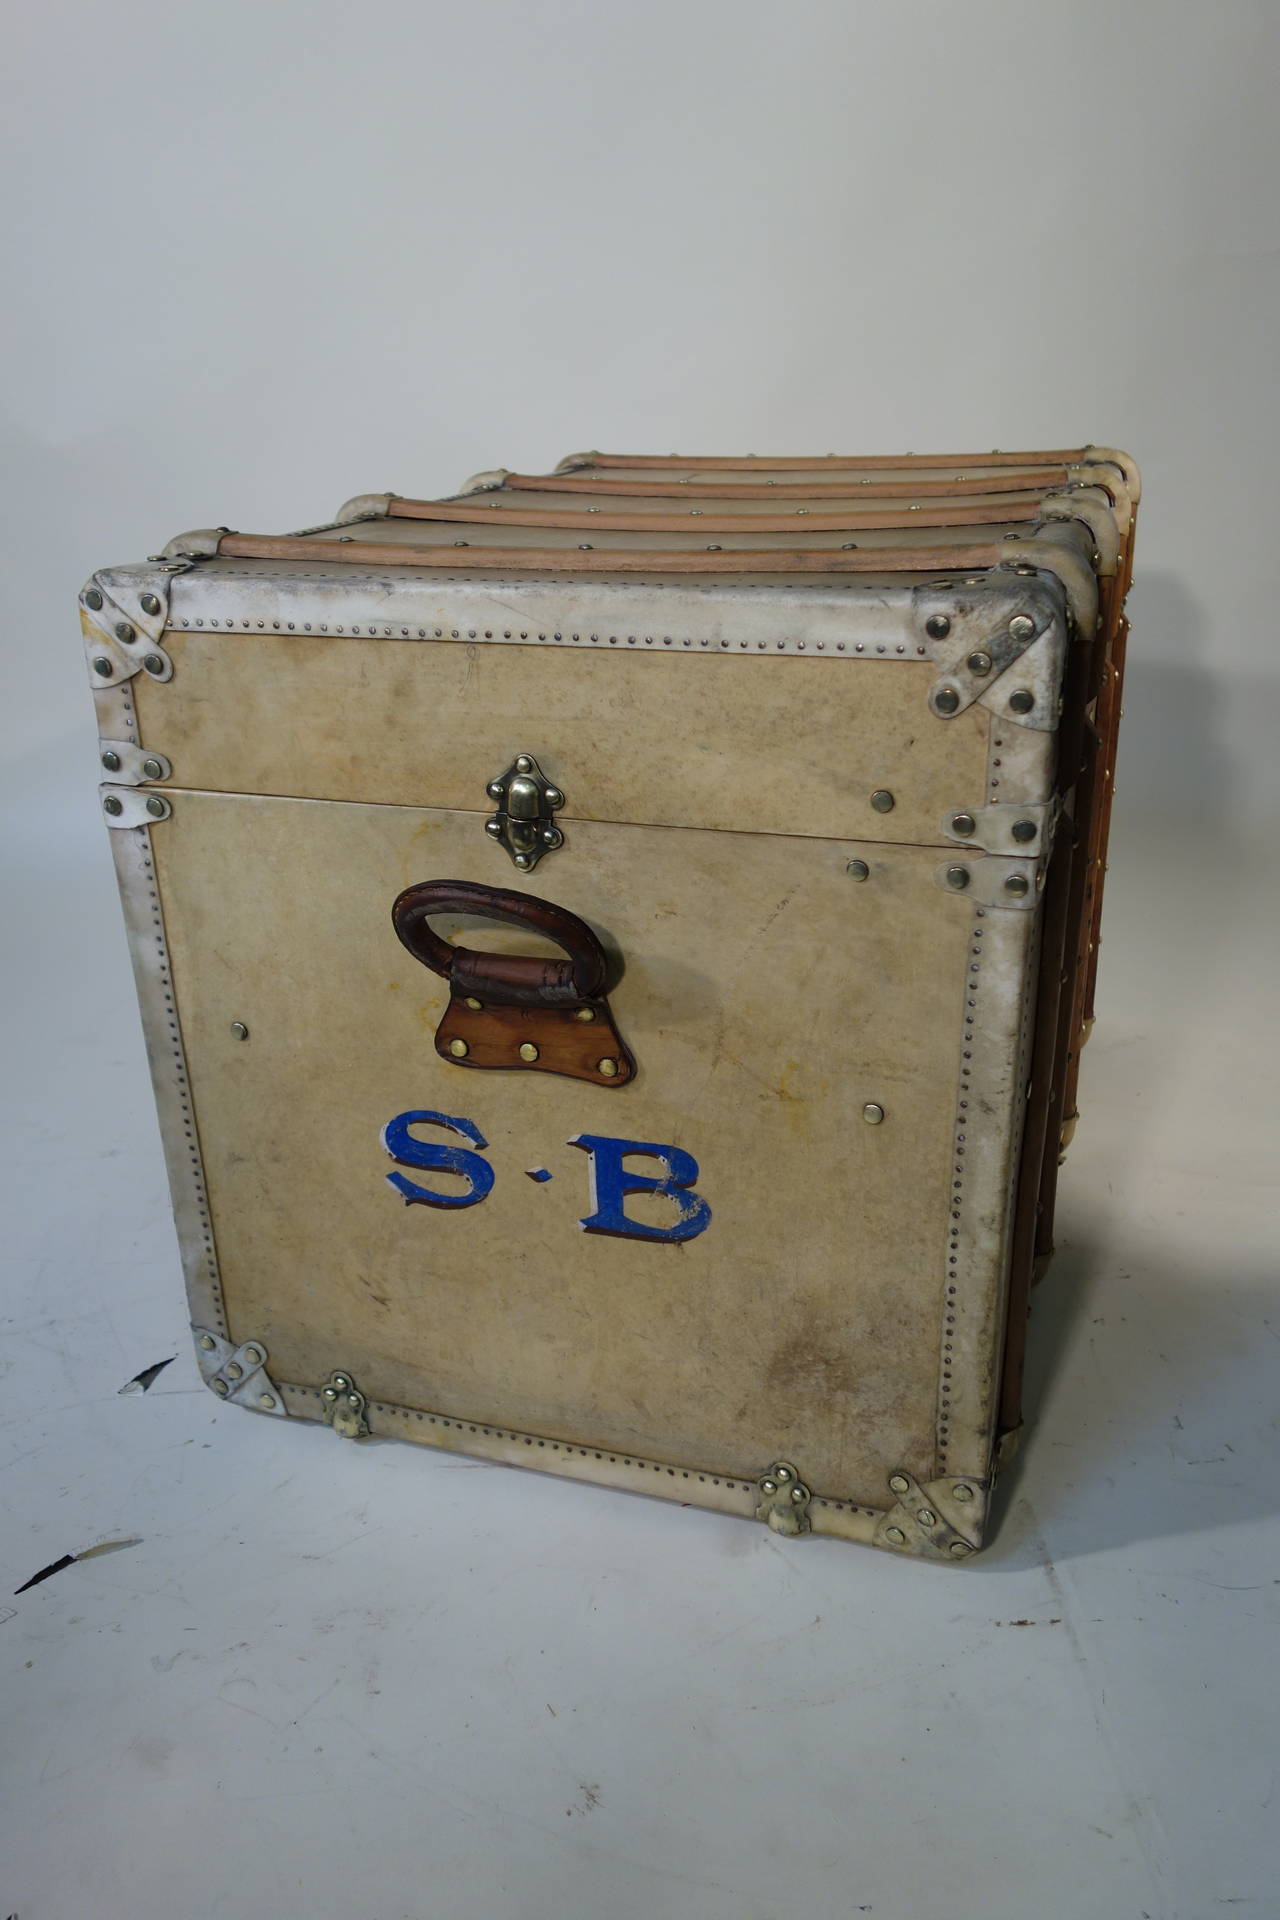 1920s Vellum Steamer Trunk
Brass lock  

Original leather  handel 

Original  inside  with 2  trays 
Size   in  cm  :  90 cm  larg   X 63 cm high   X  57  cm deep

All the trunks we sell have been cleaned or restored by the workshops,
Of